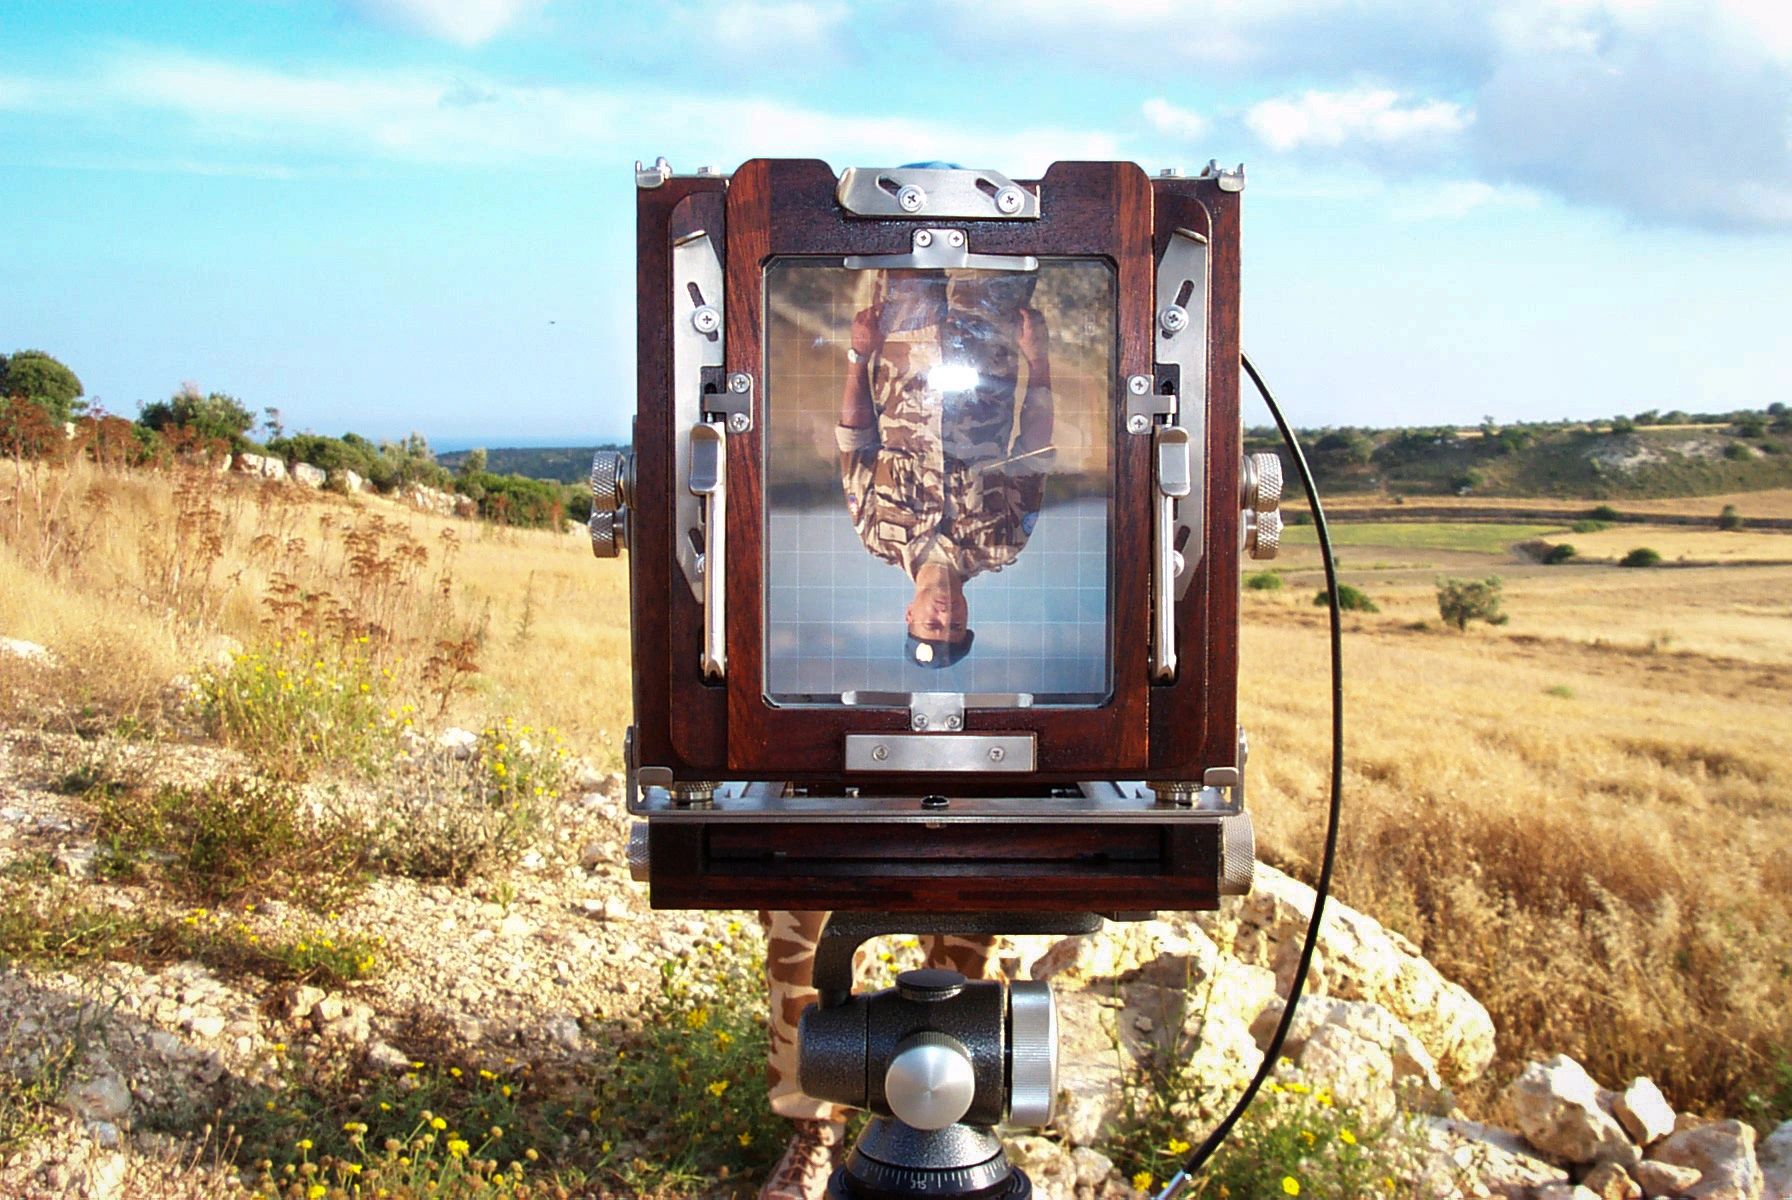 Chan Chao's camera during a photoshoot in Cyprus